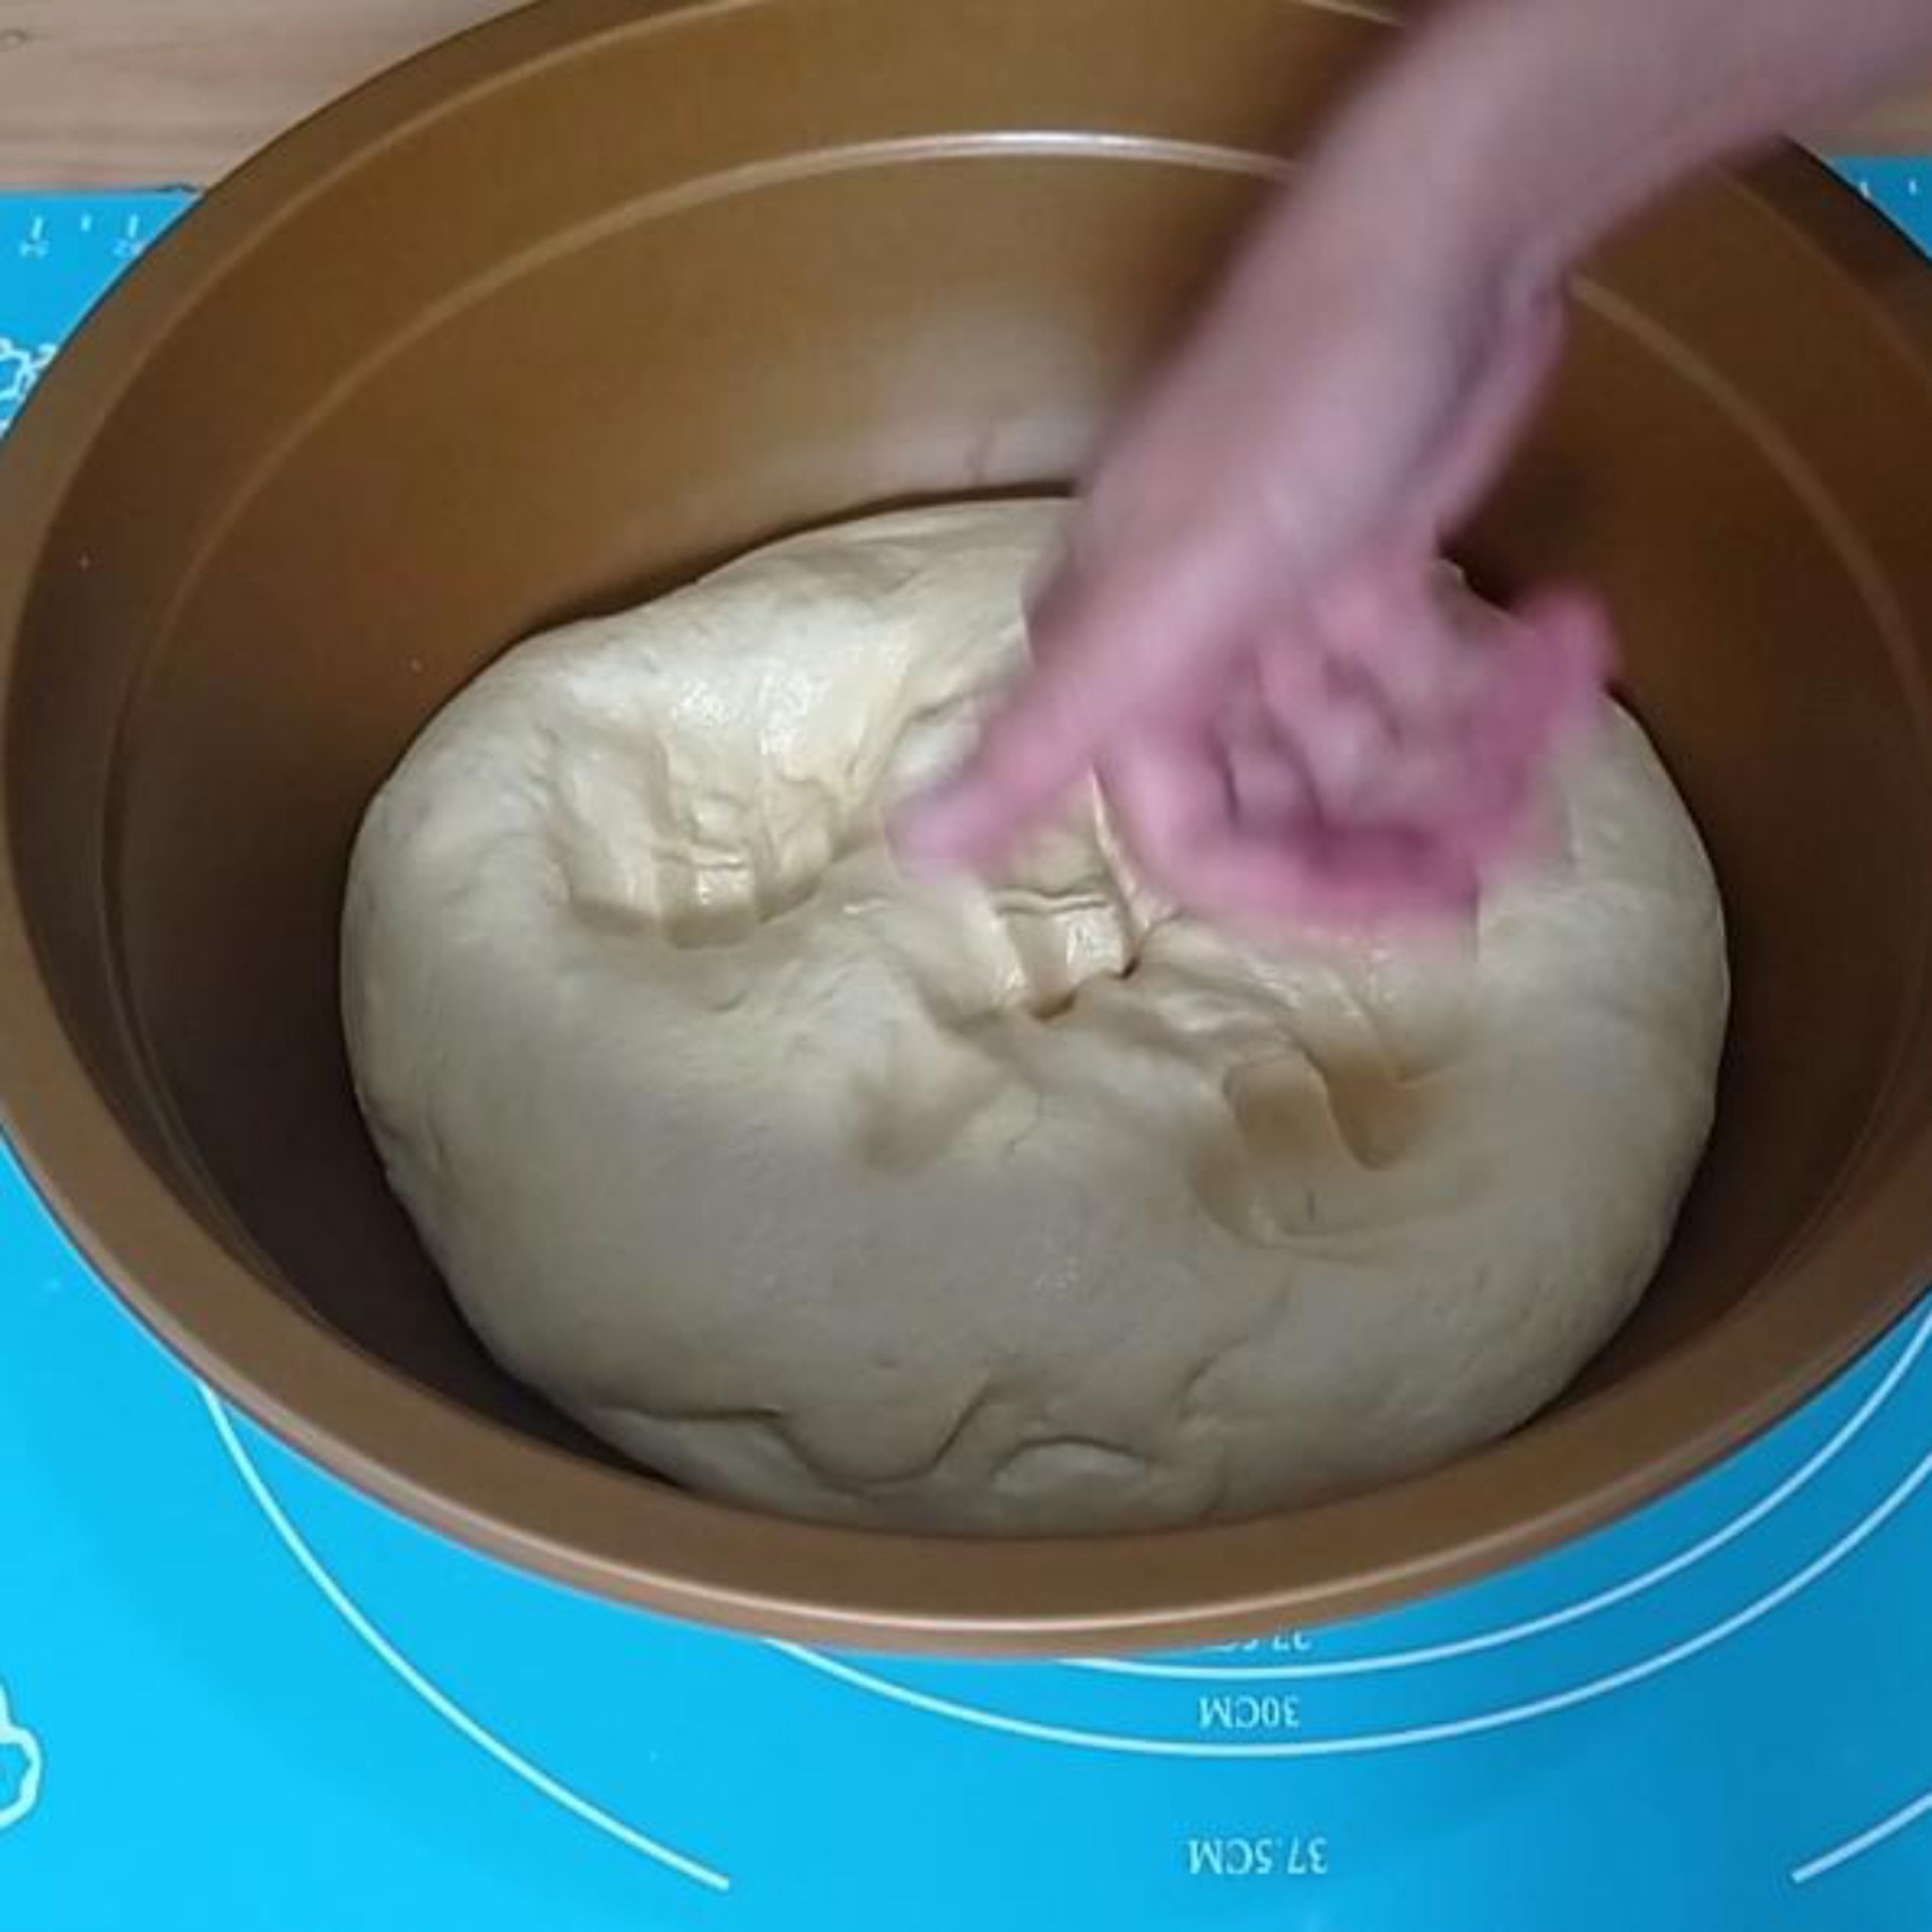 After 1 hour, open the kitchen towel and punch the dough to remove the air bubbles. Make the dough into a ball and divide the dough into 9 pieces.